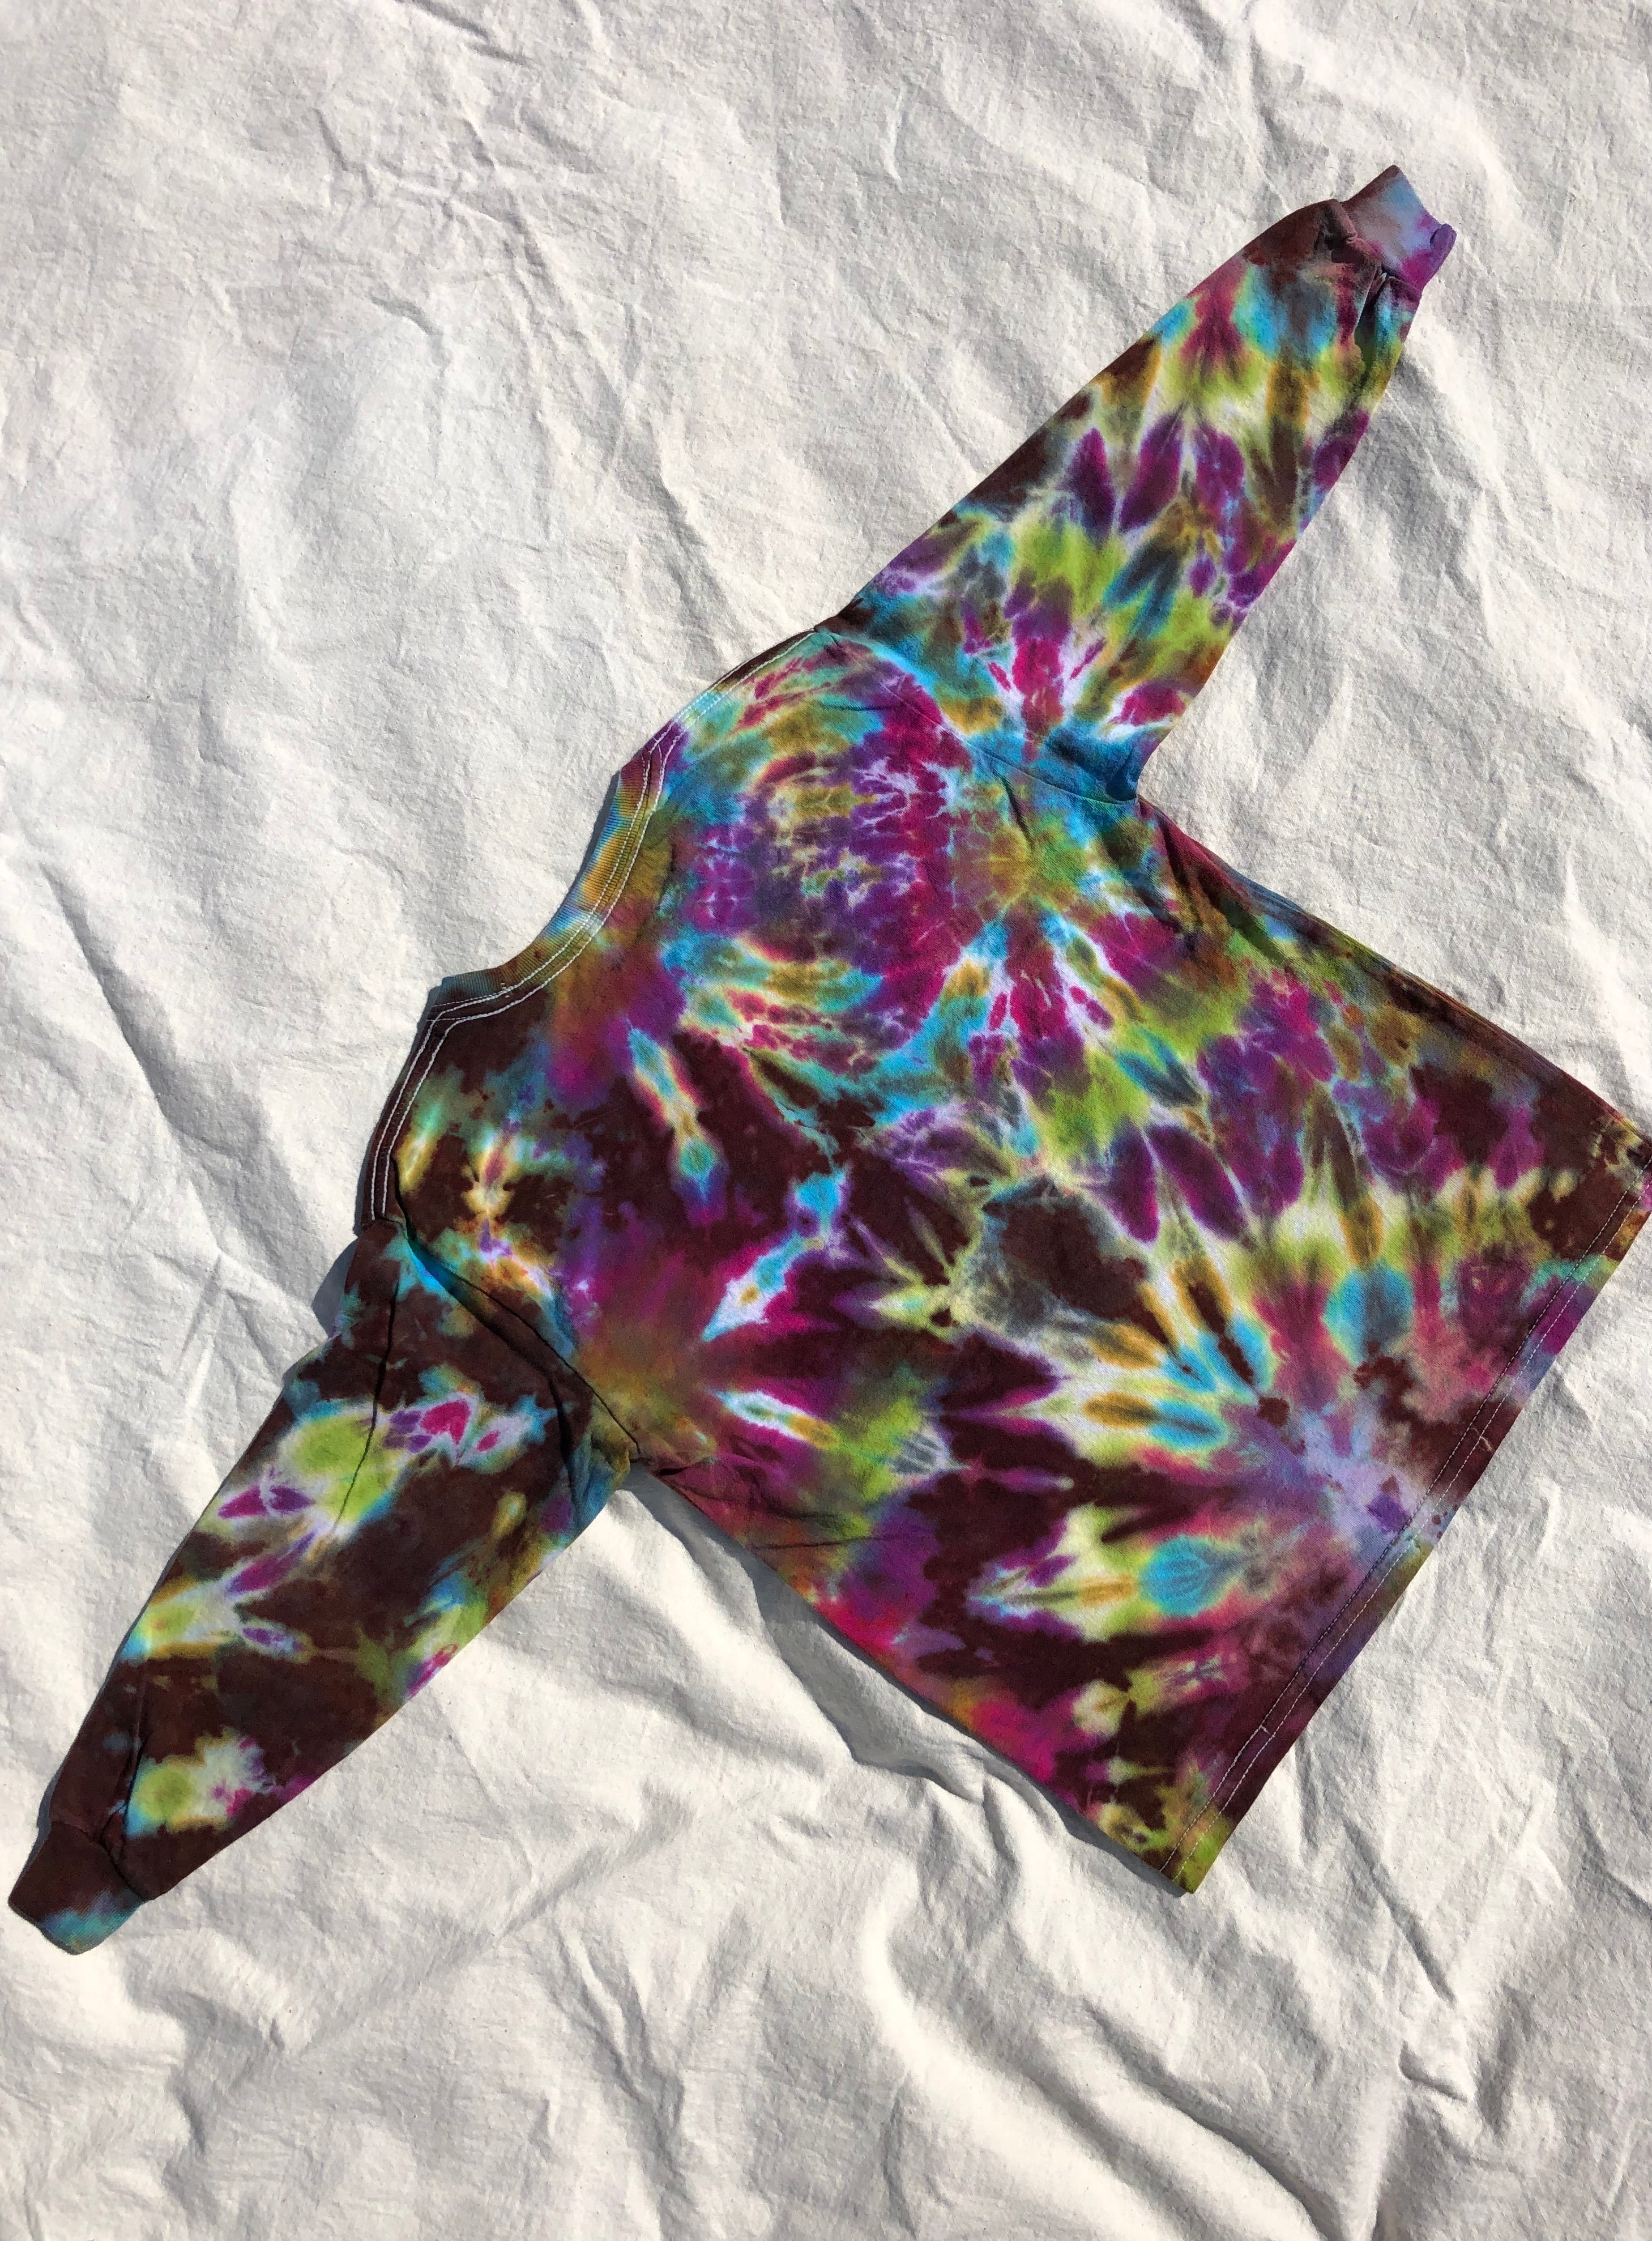 Youth Tie Dye Top #8 (size S)